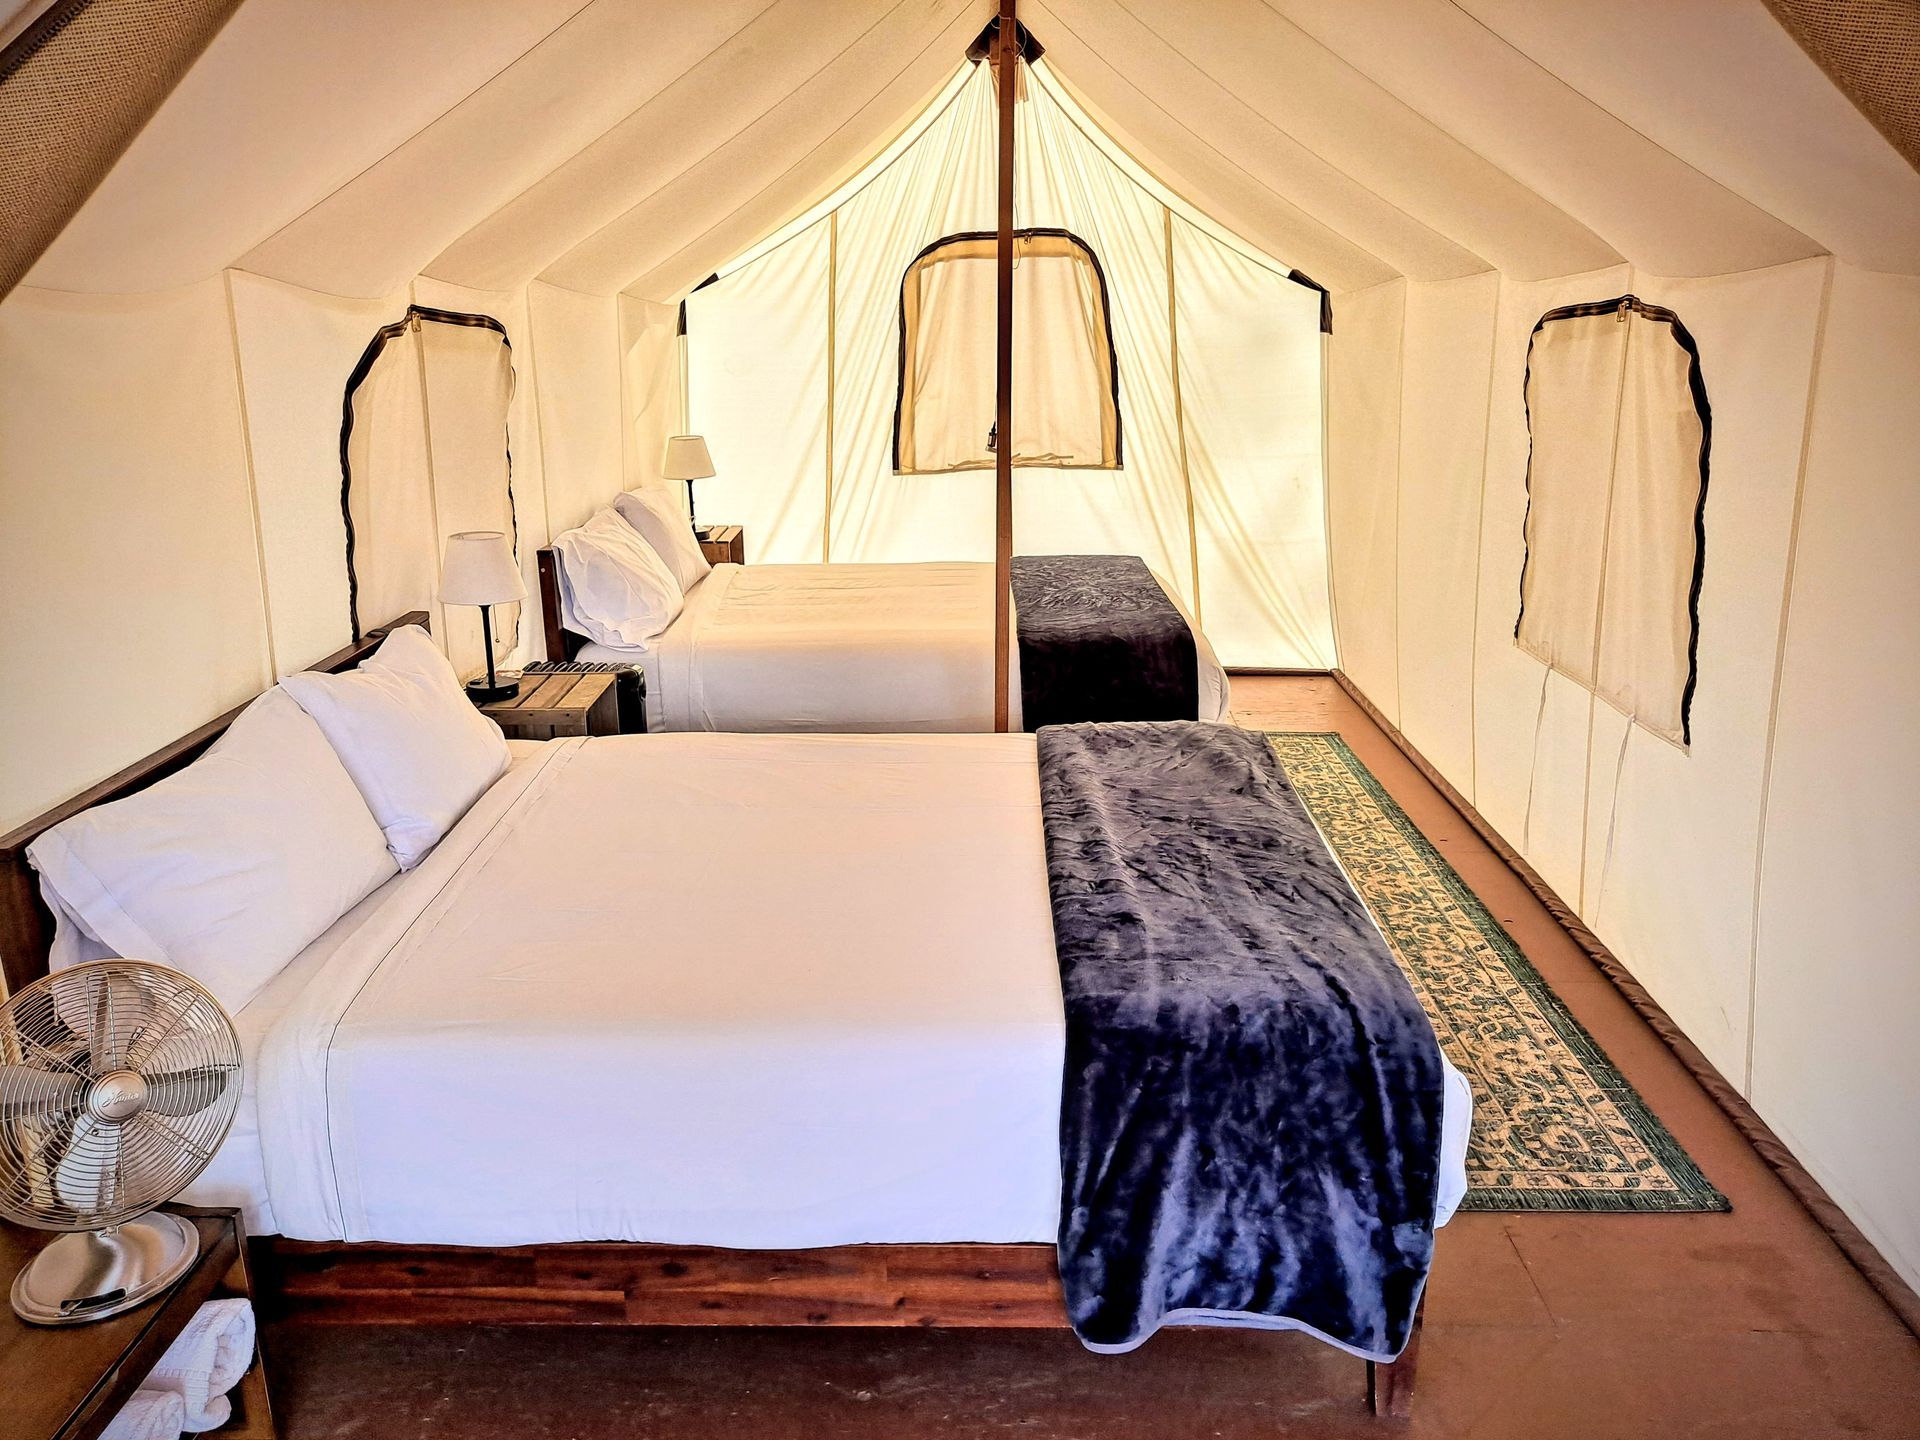 Beds 2 -Tent 2 Queen at Wildhaven Yosemite Glamping